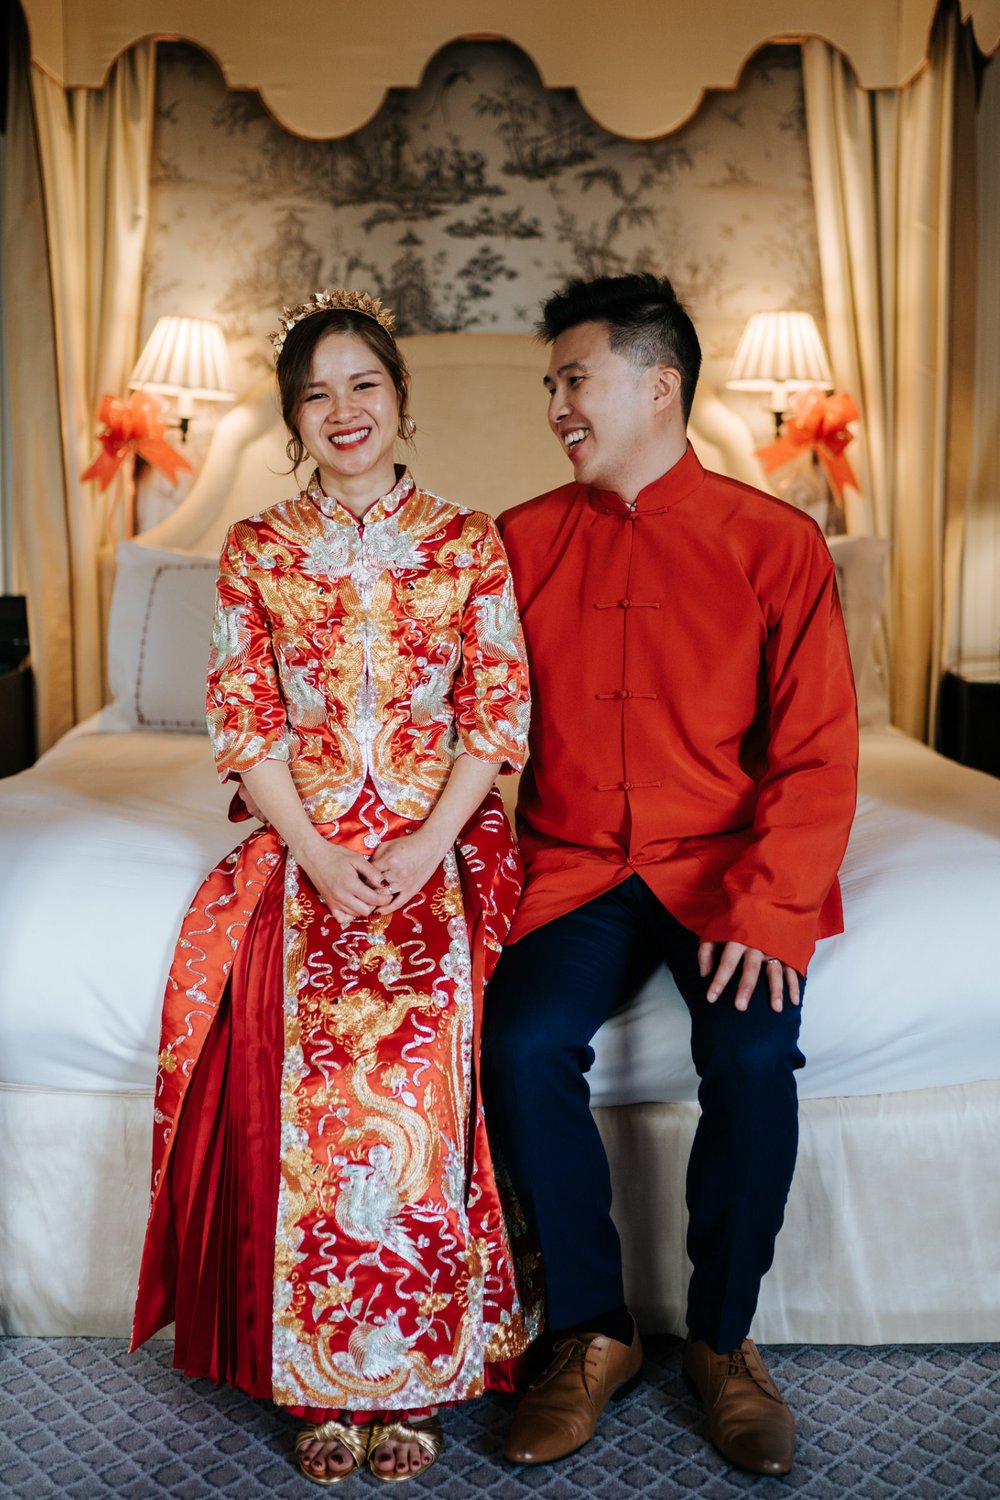 Bride and groom, in beautiful red Chinese dress, pose for photograph on top of bed